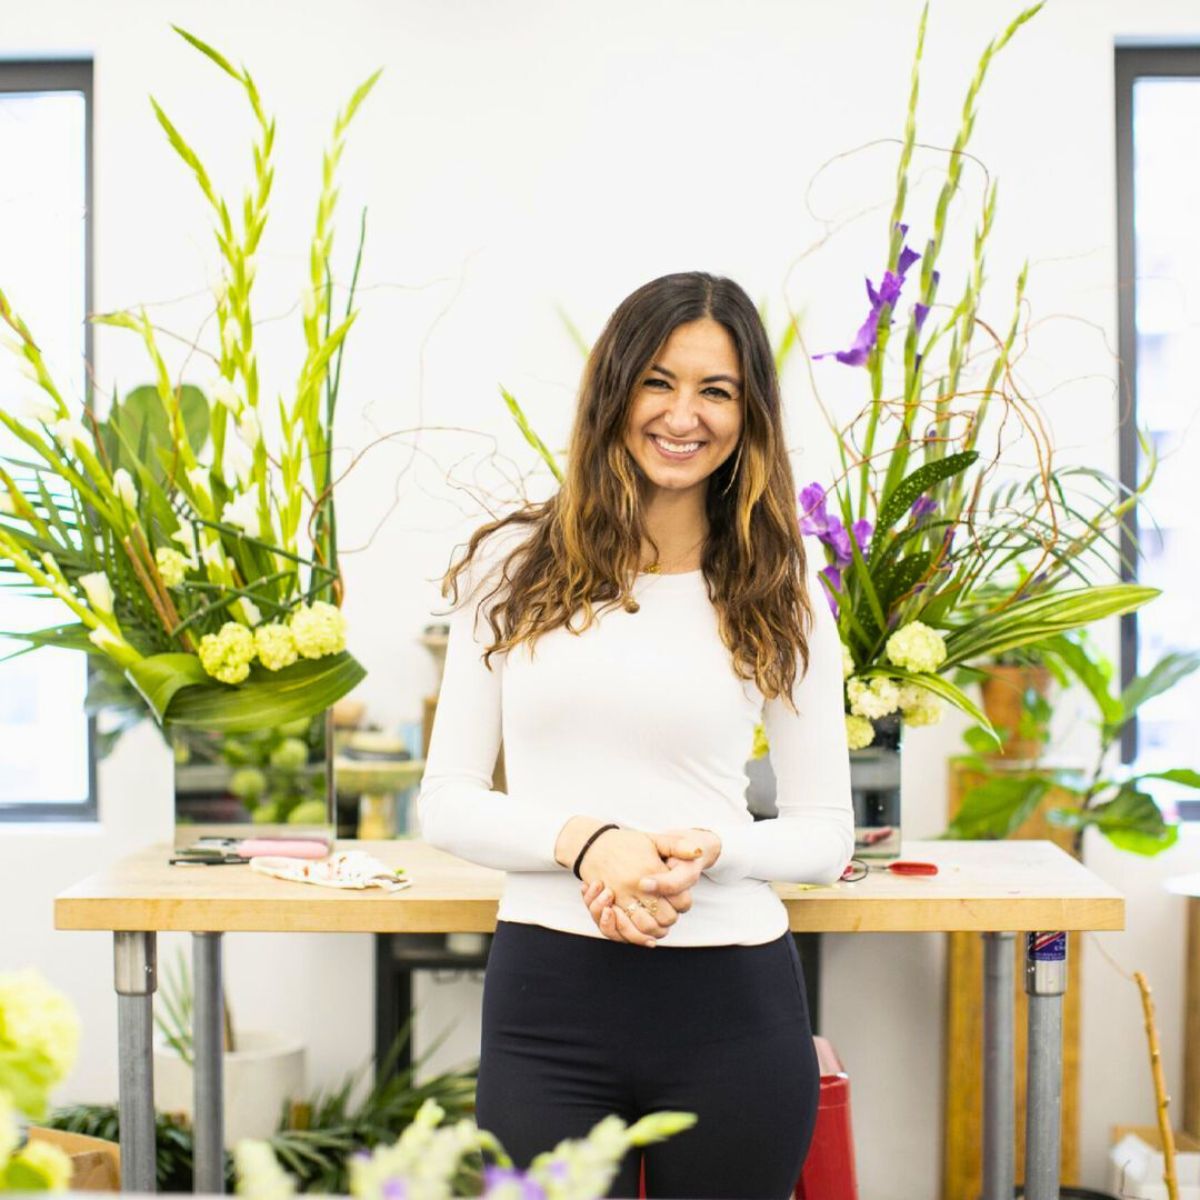 Two day courses at FlowerSchool NYC